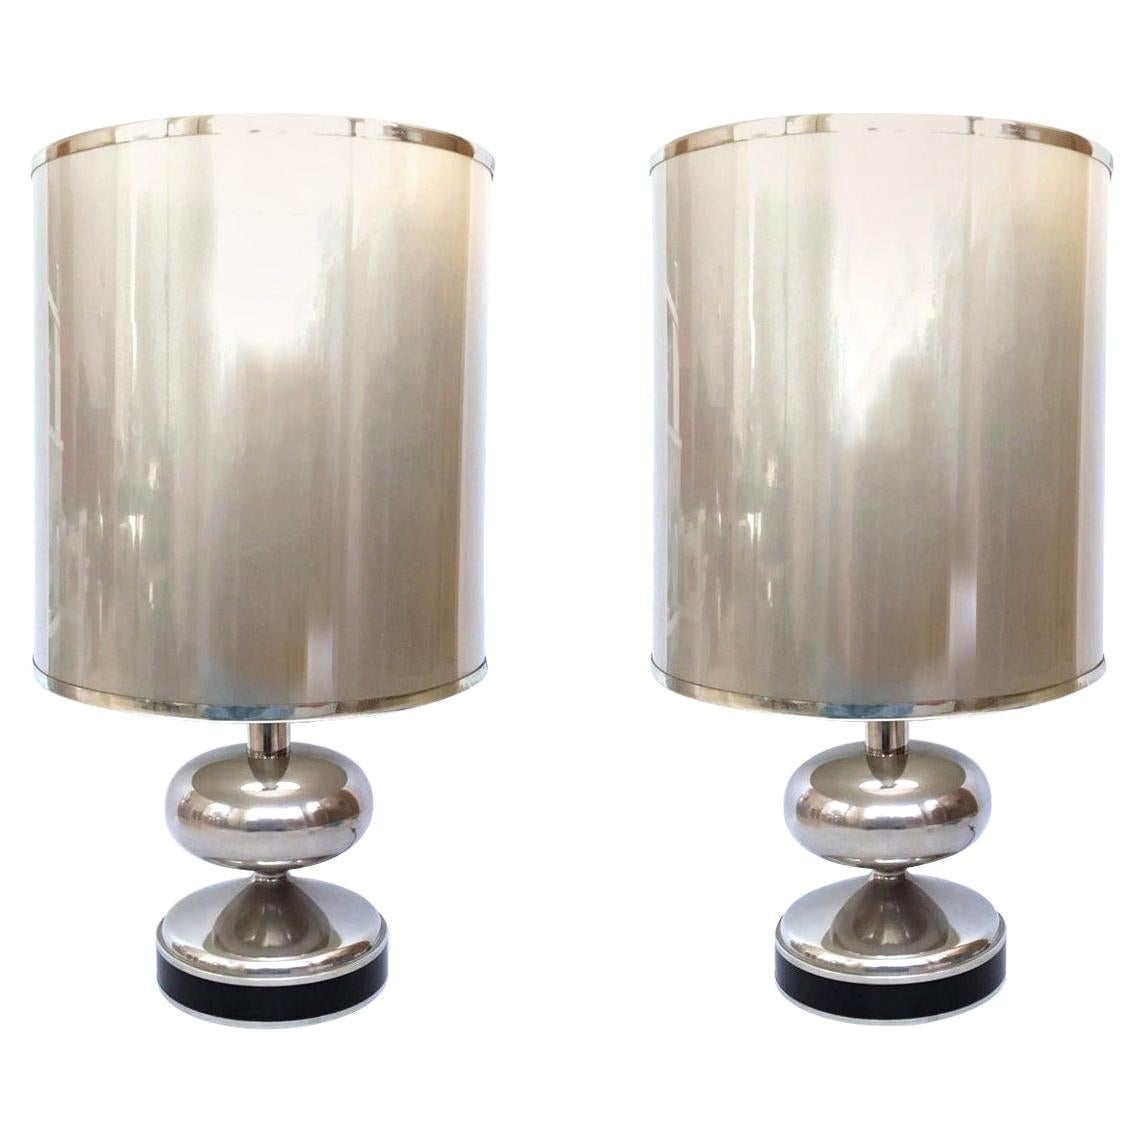 Pair of Midcentury Chromed Spanish Table Lamps, 1970s